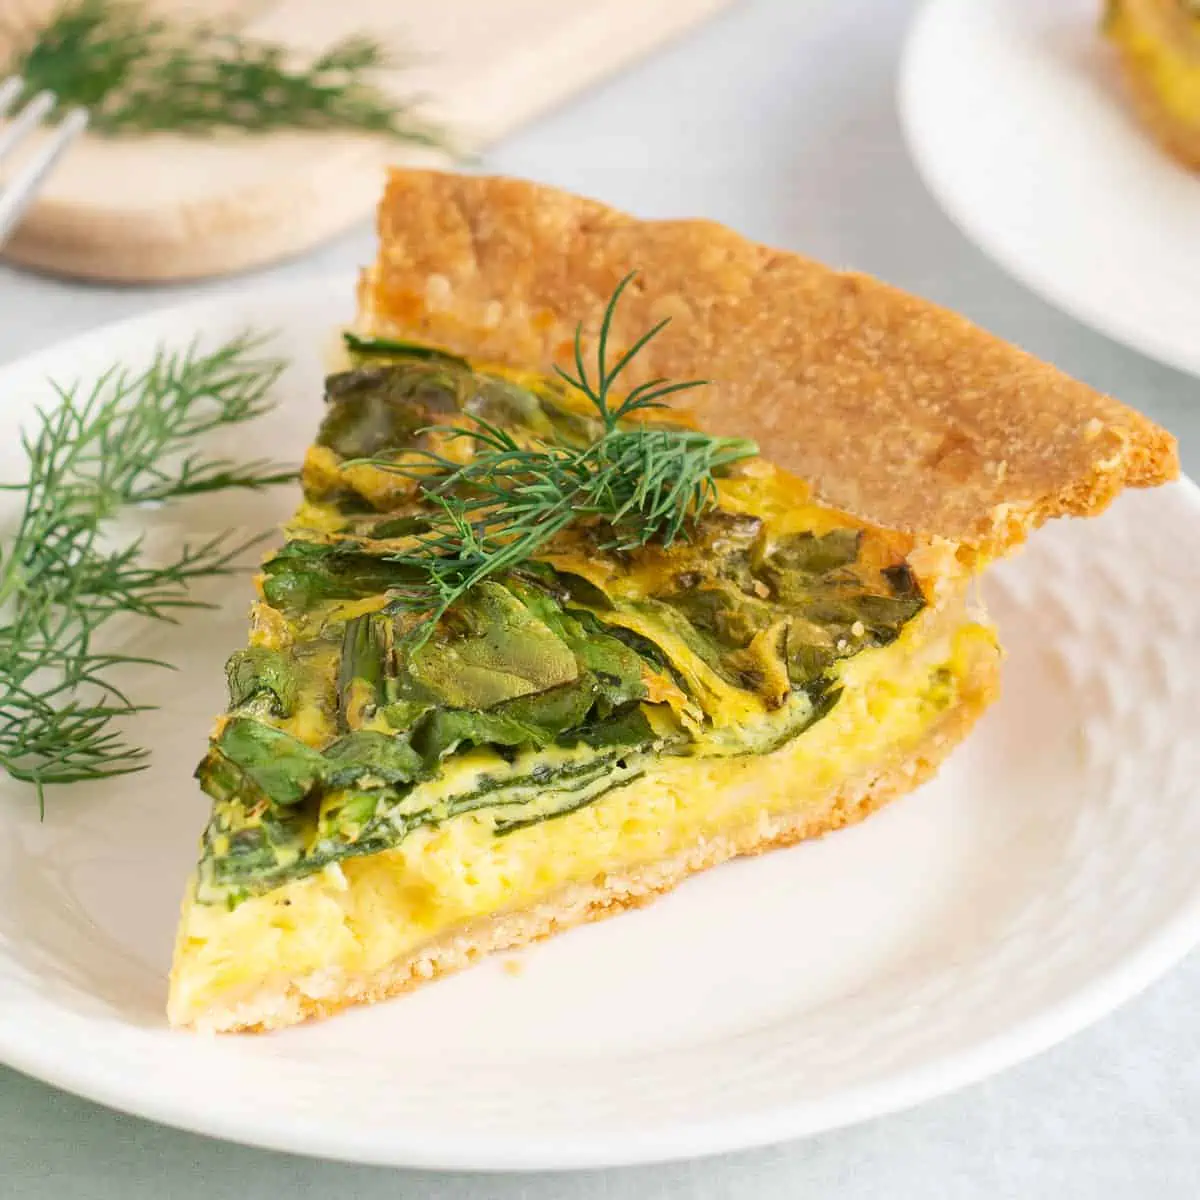 Slice of Just Egg quiche.